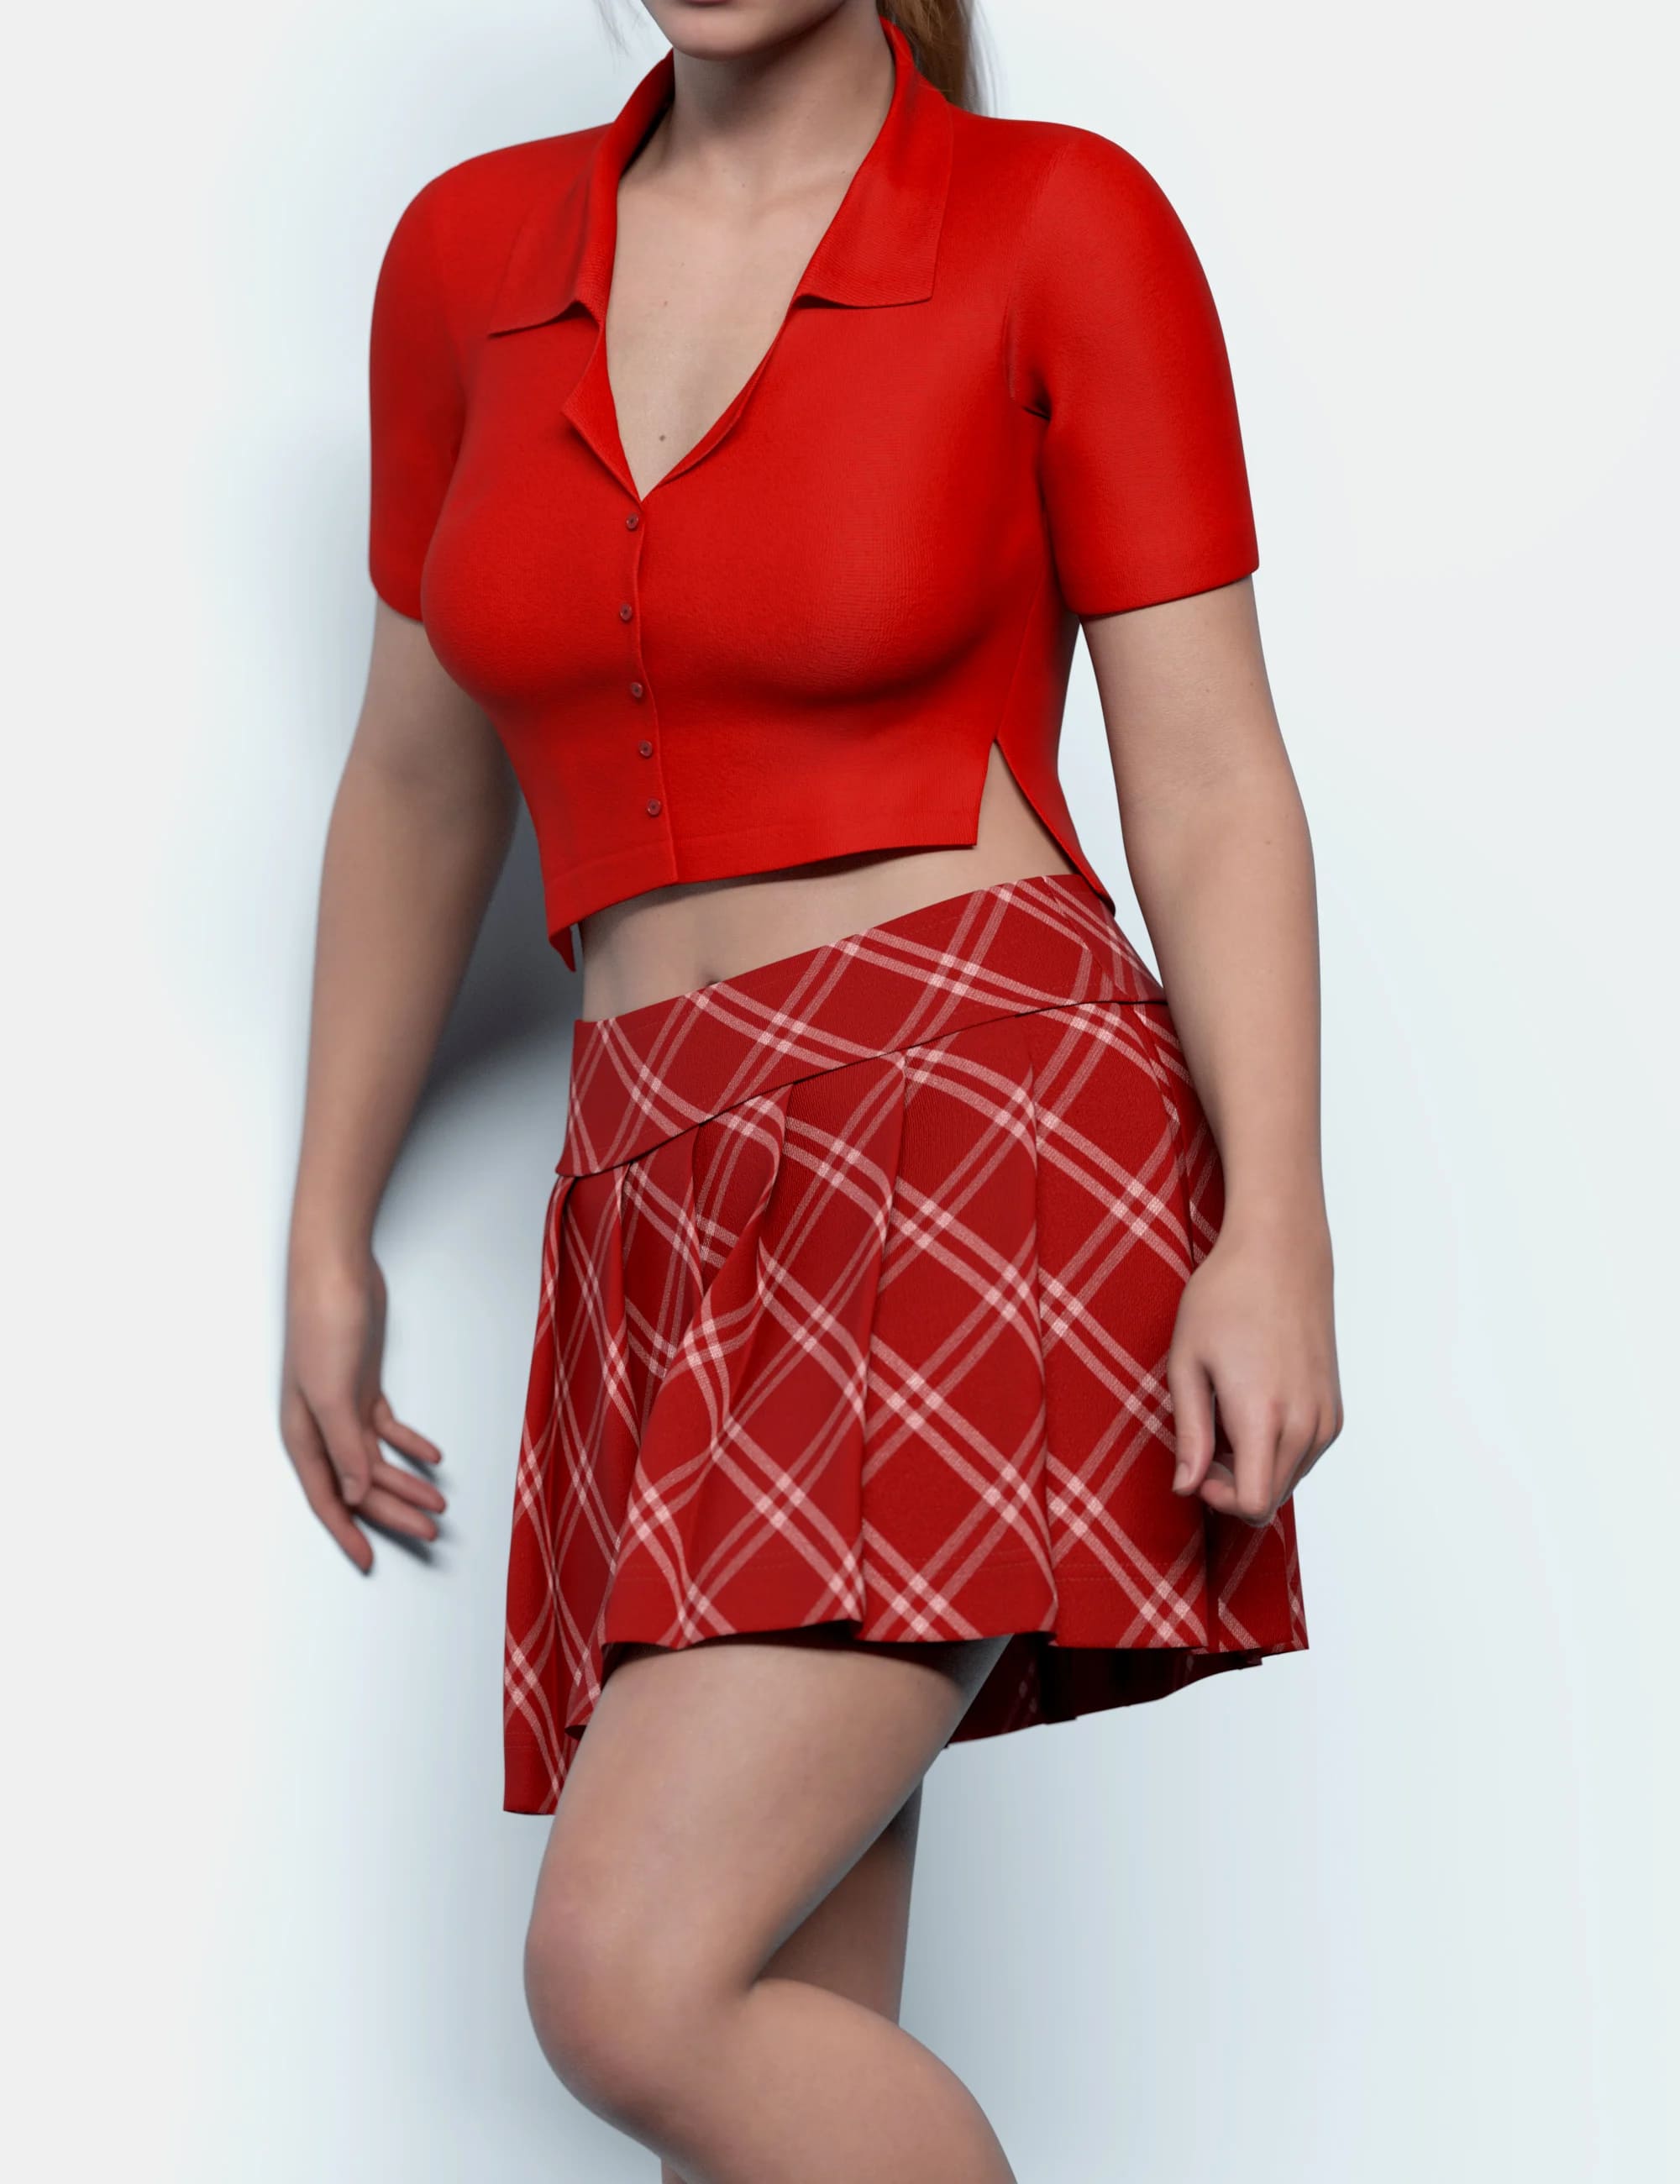 dForce Buttoned Crop Shirt and Pleated Skirt for Genesis 9_DAZ3D下载站